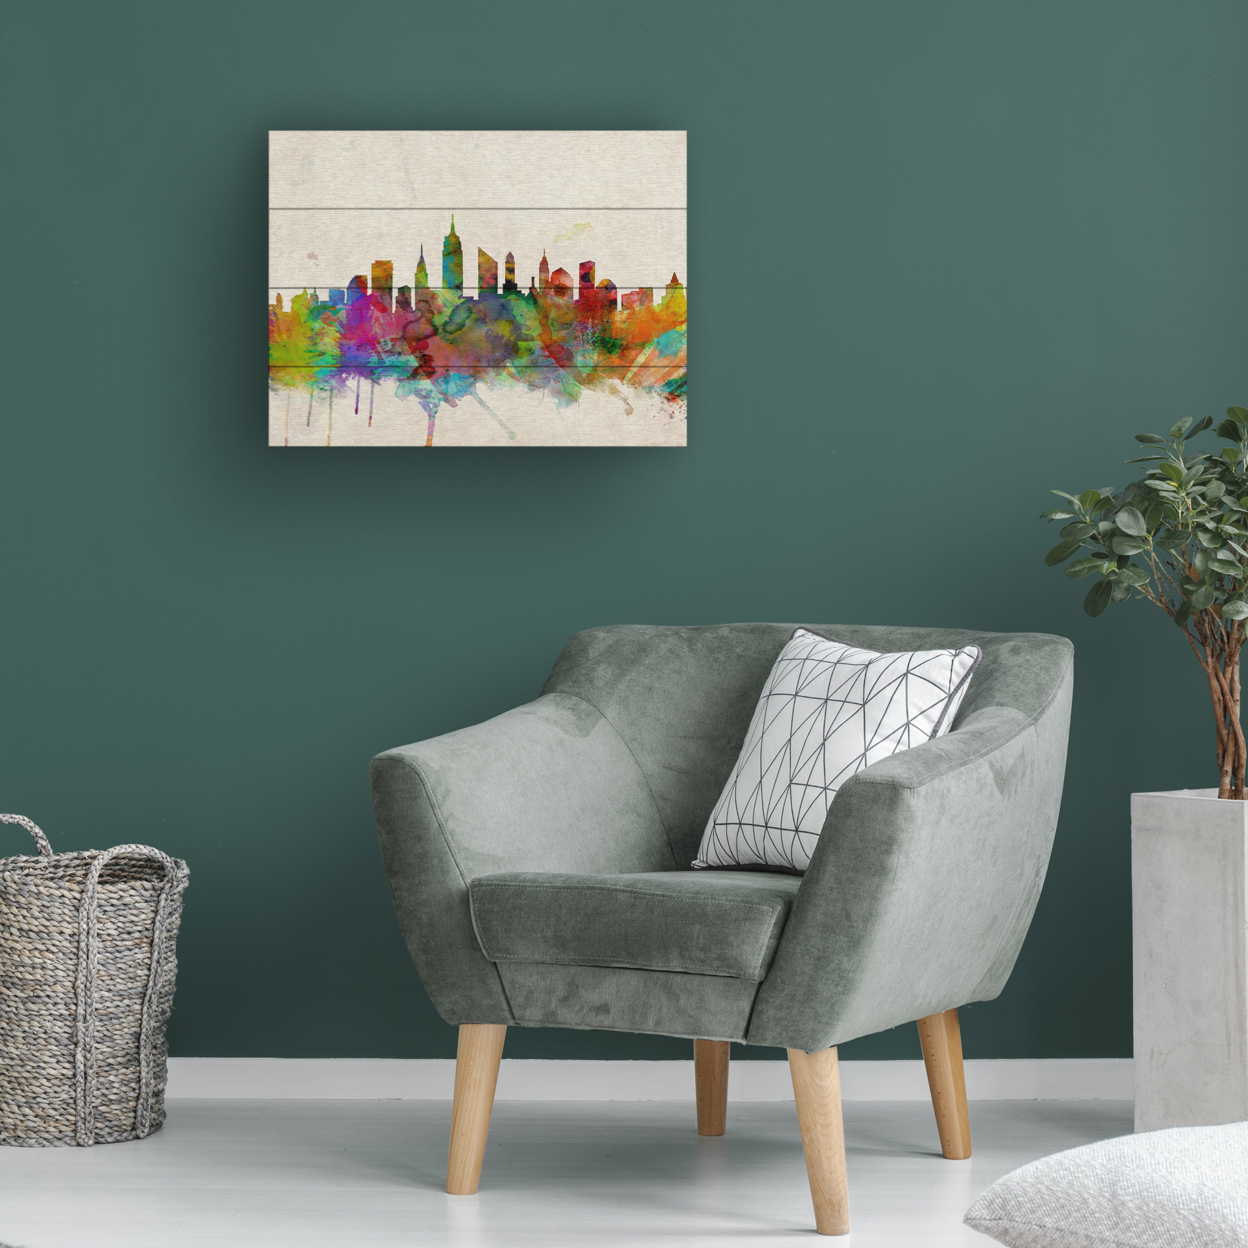 Wall Art 12 X 16 Inches Titled New York Skyline Tompsett Ready To Hang Printed On Wooden Planks